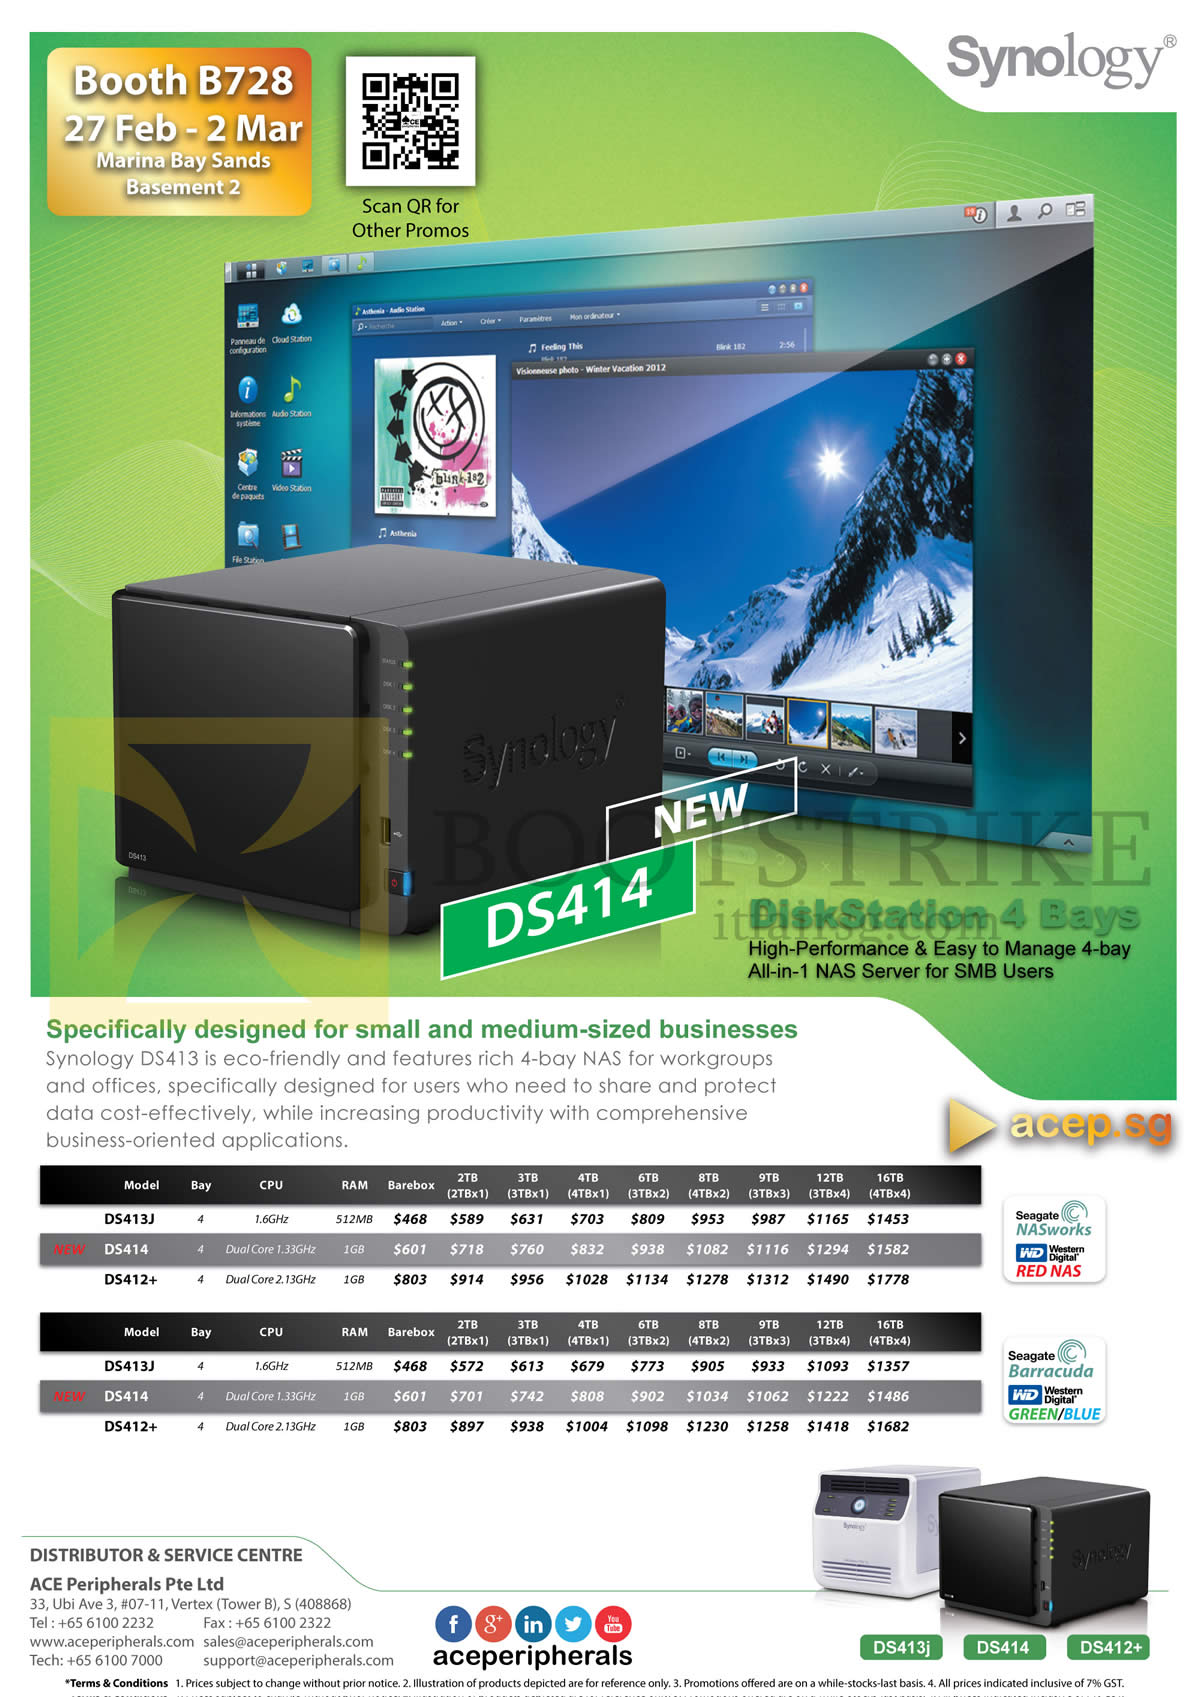 IT SHOW 2014 price list image brochure of Ace Peripherals NAS Synology DiskStation DS413J DS413 DS414 DS412 Plus